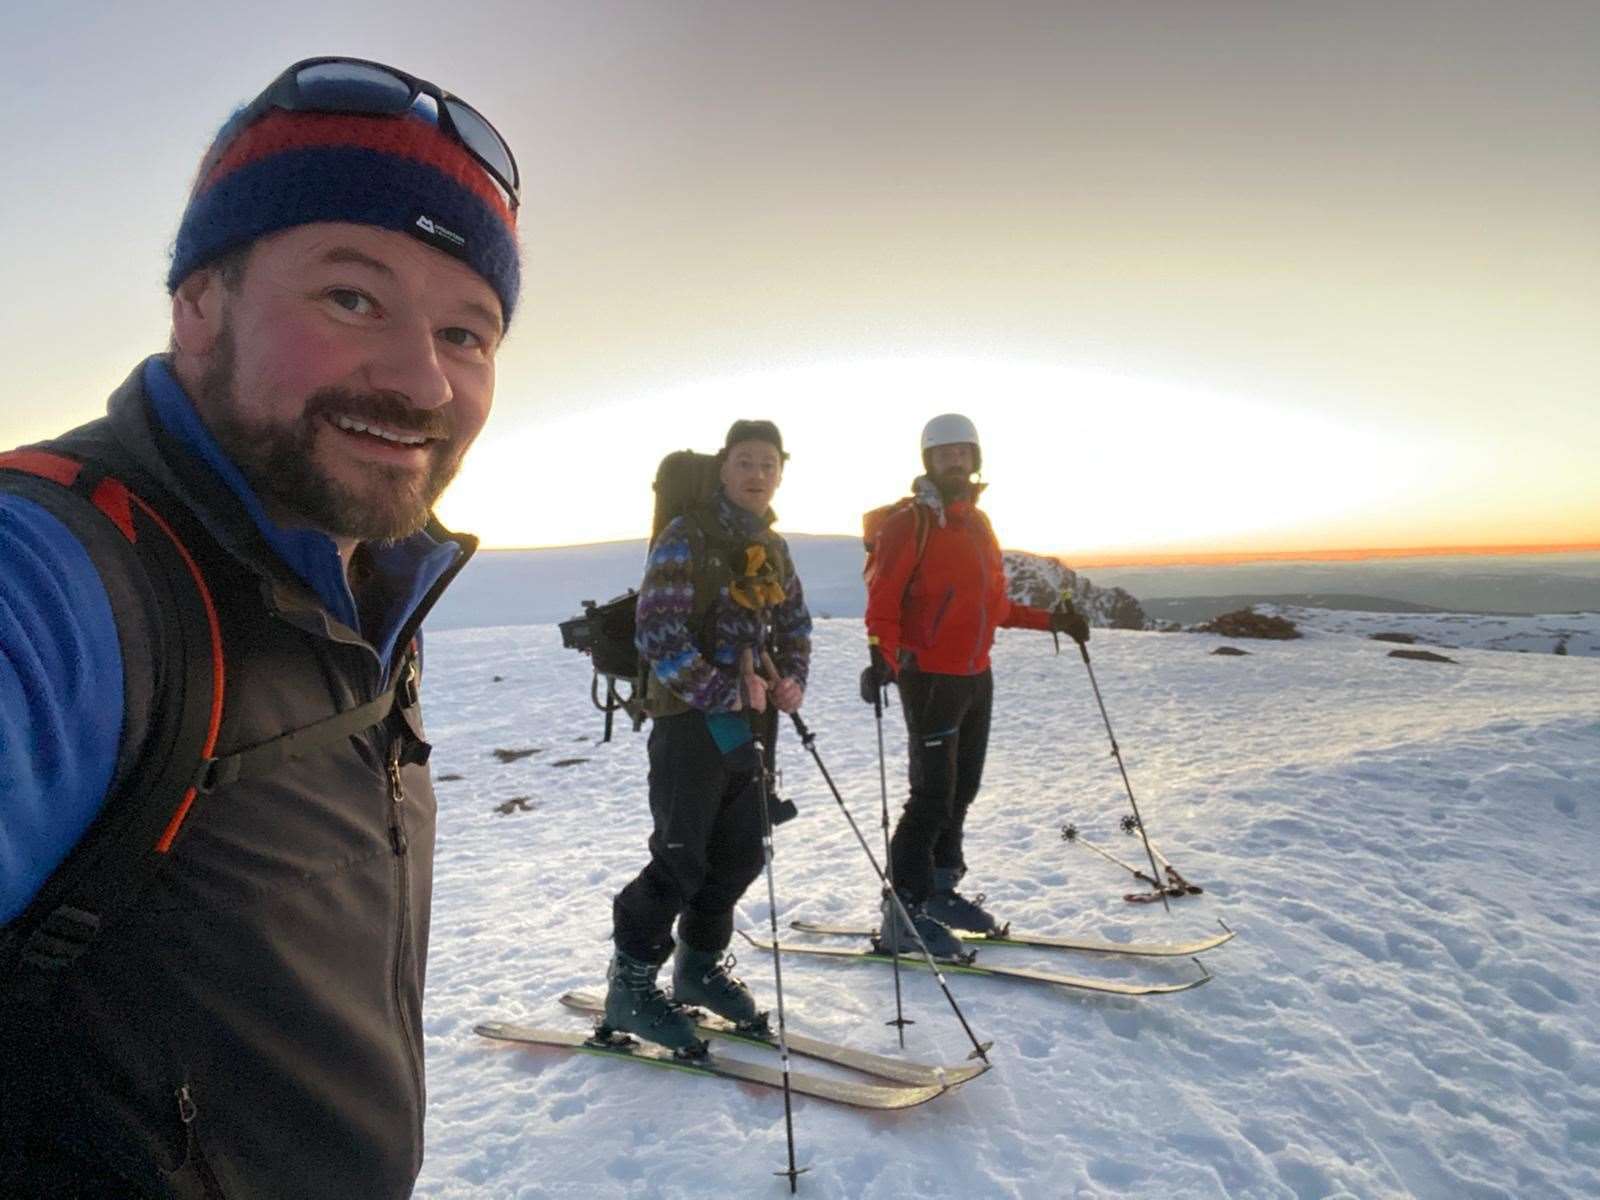 Aviemore-based mountain expert and cameraman Kirk Watson taking a selfie with Andrew O’Donnell and Mark Taylor in the Cairngorms.